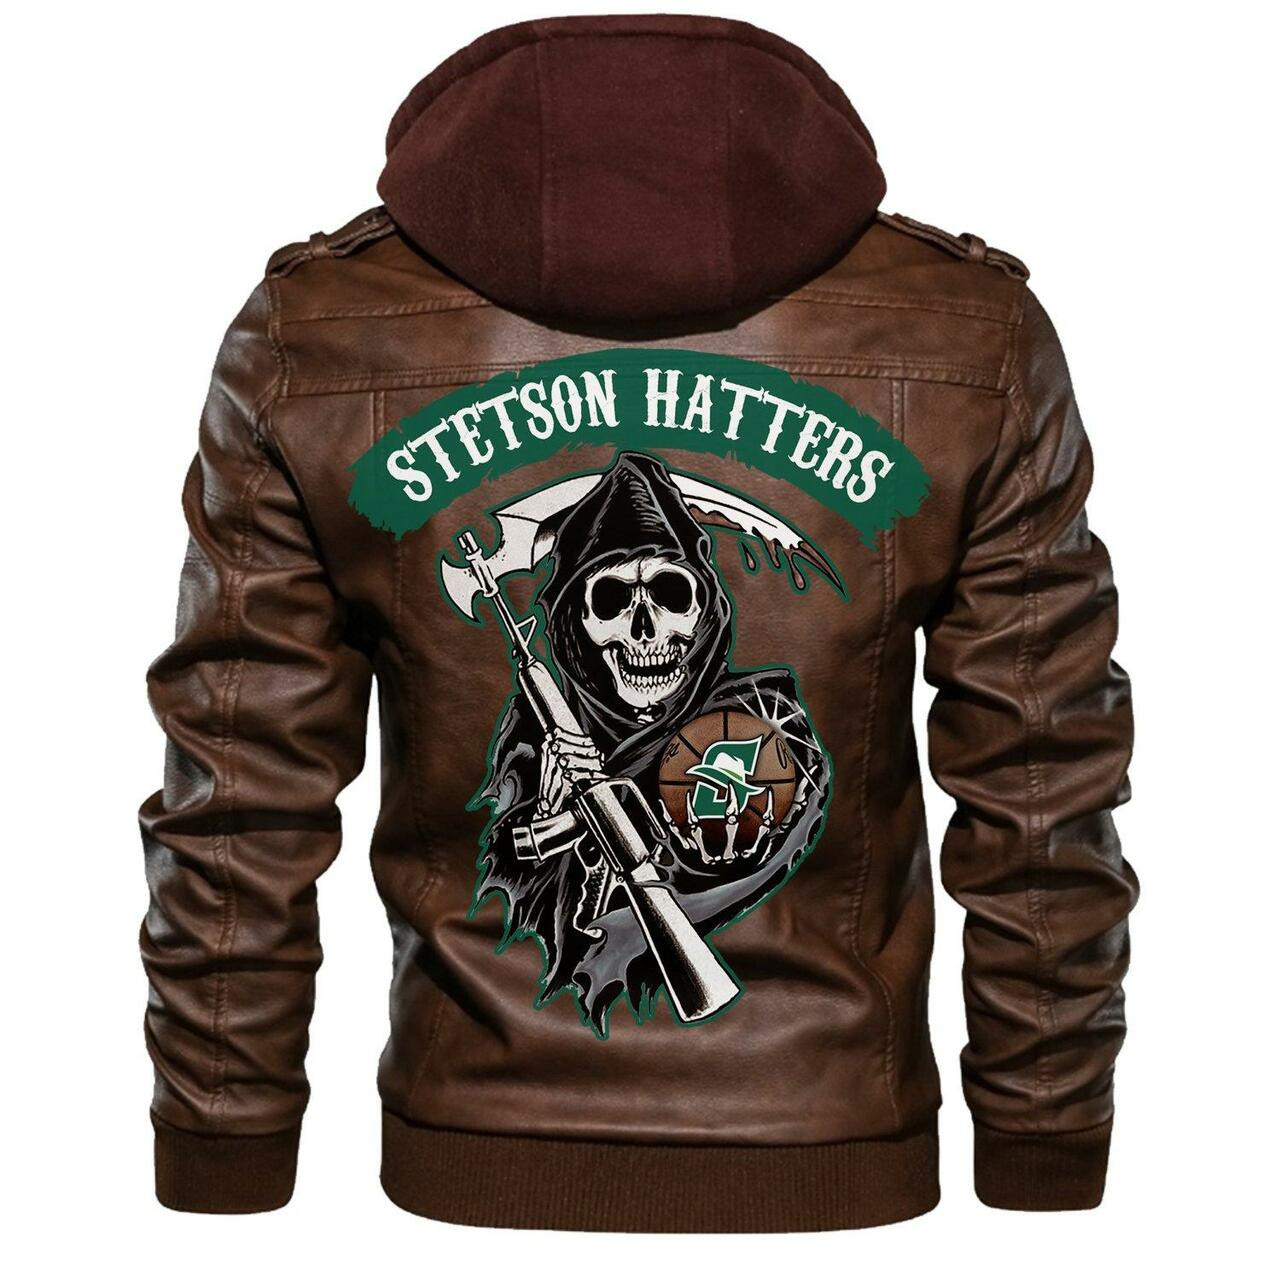 Our store has all of the latest leather jacket 78